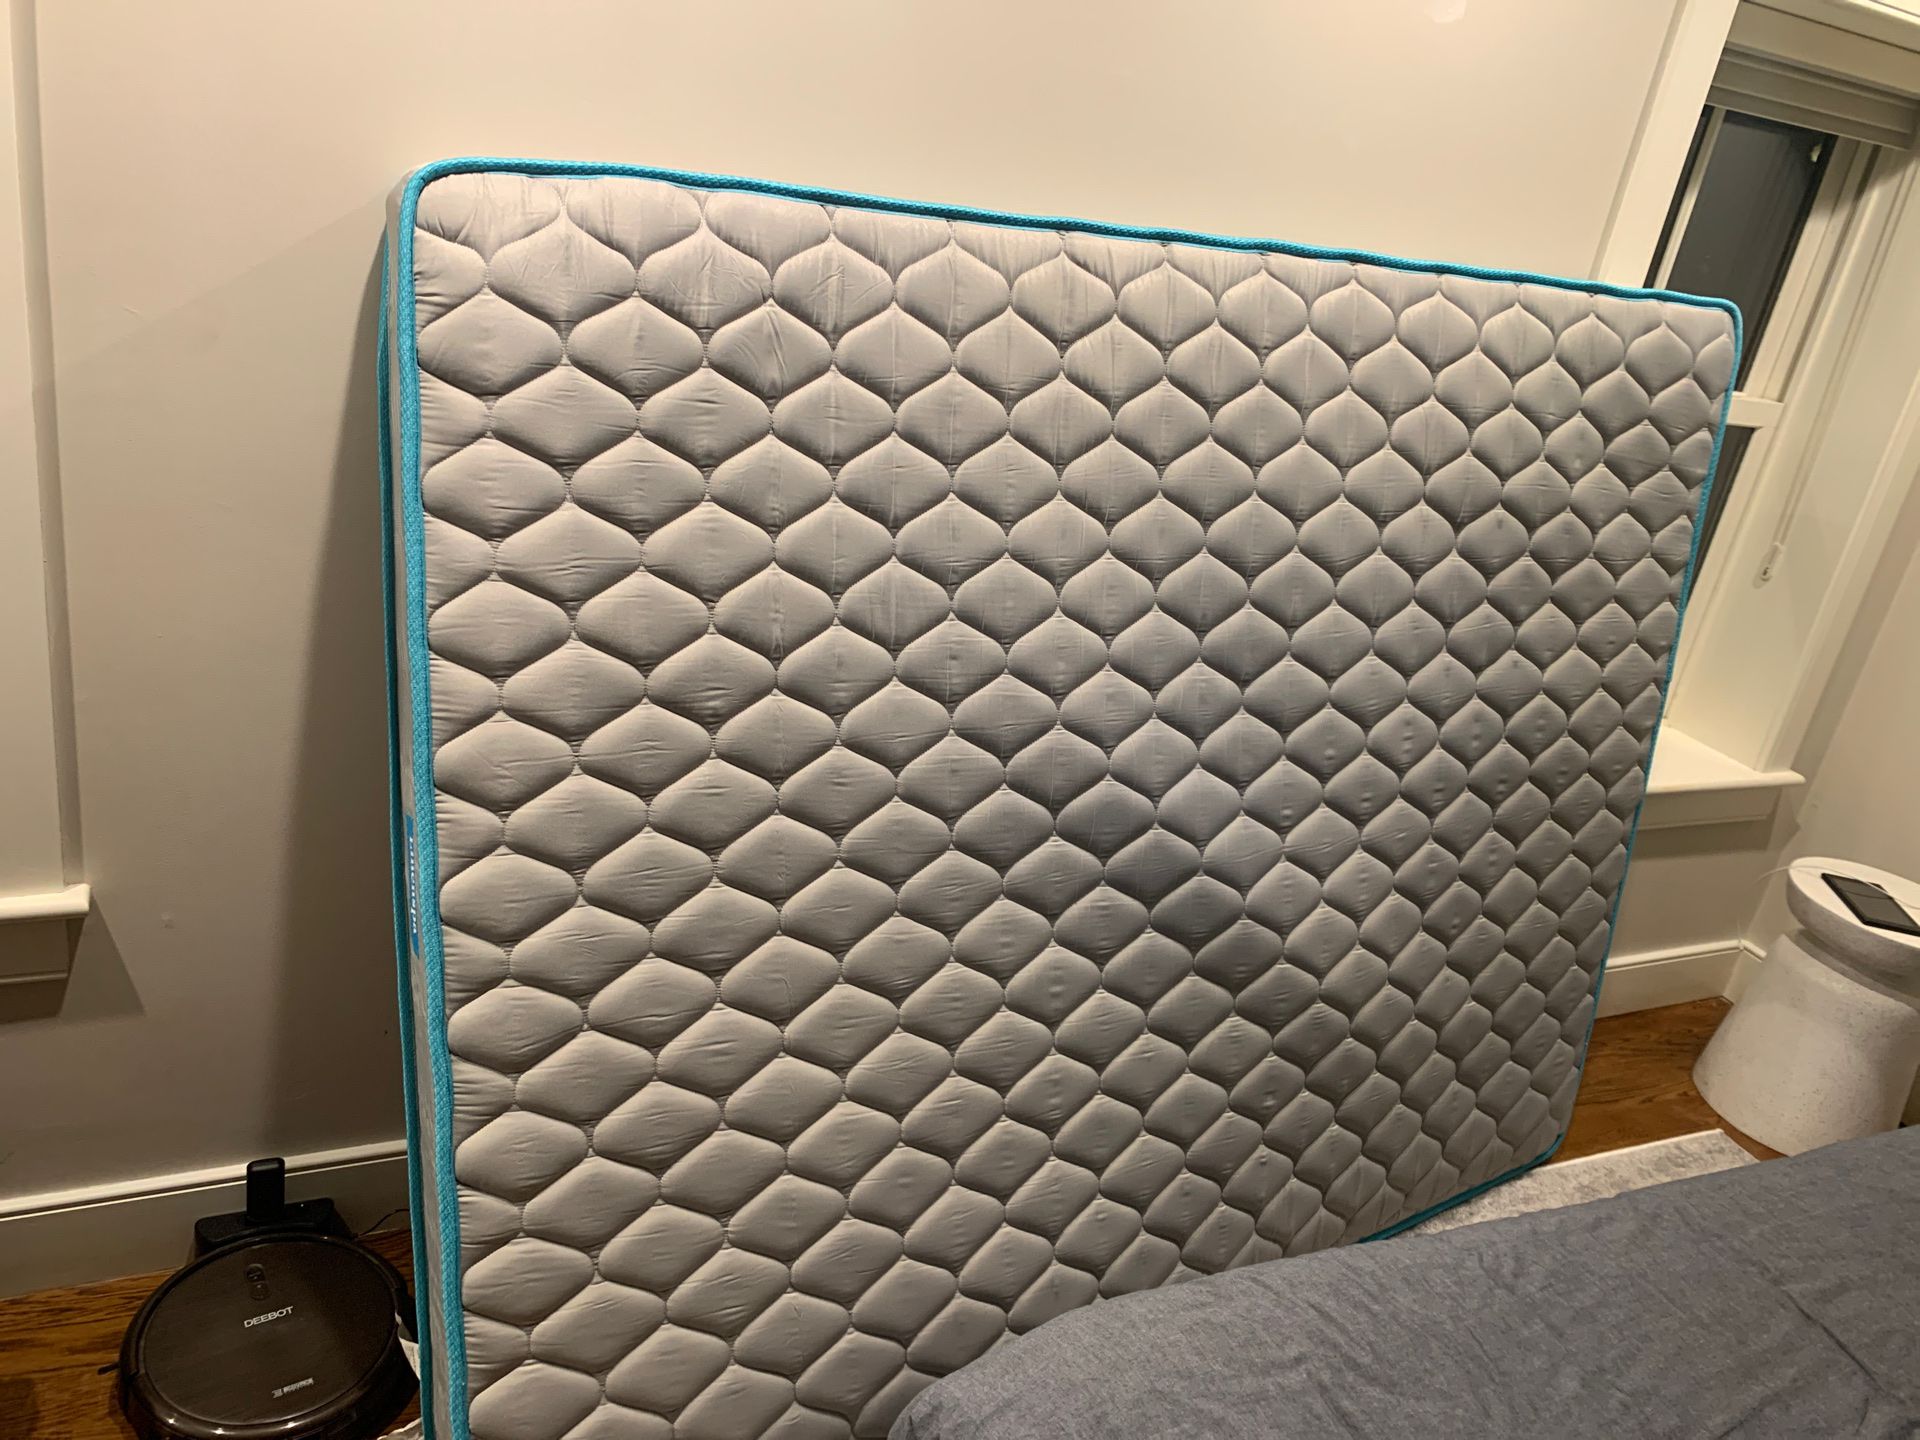 Free queen mattress for pick up!!